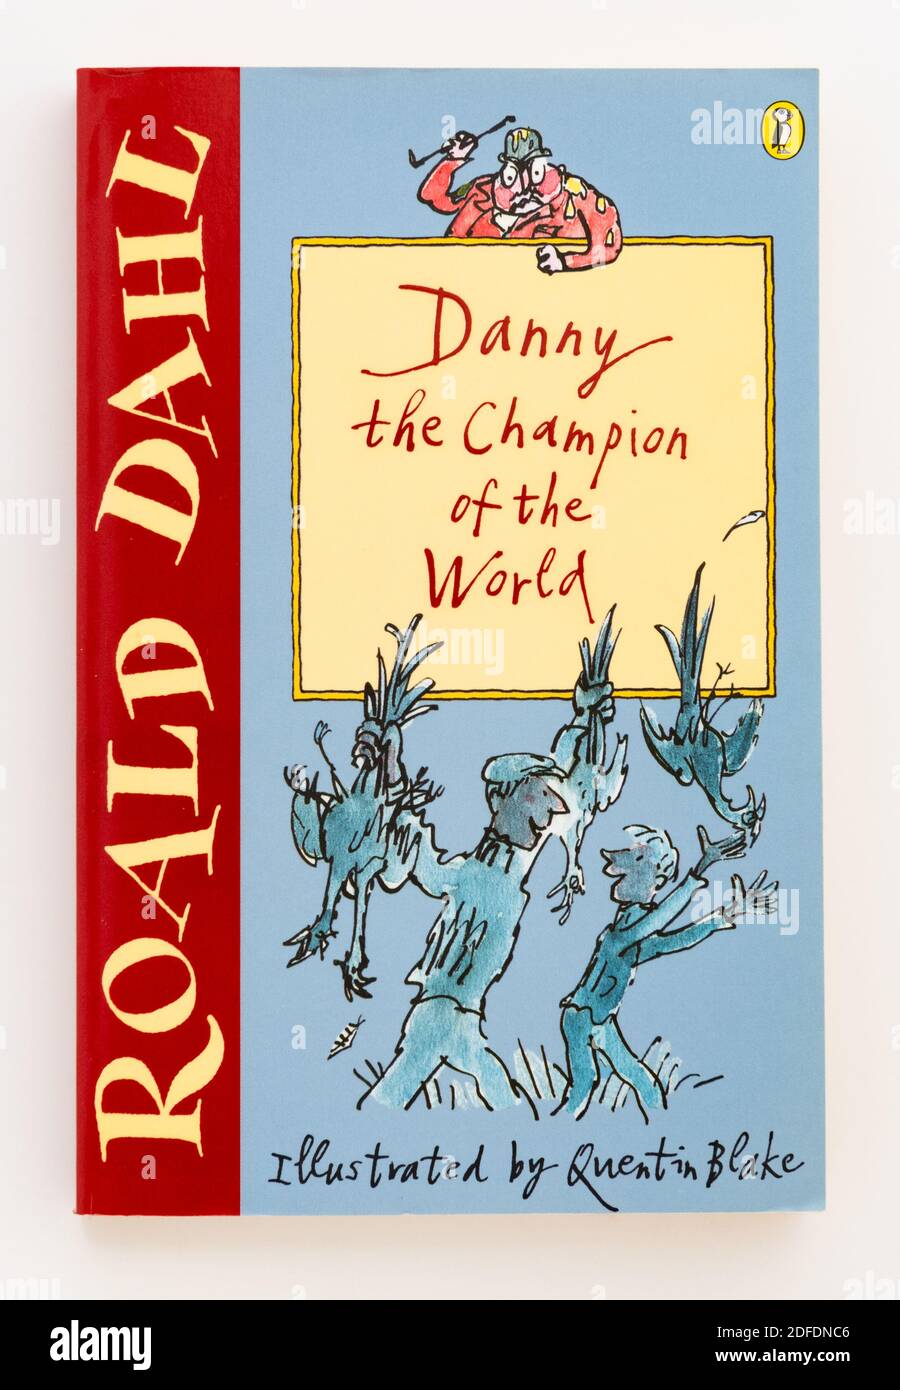 Quentin blake book stock and images - Alamy